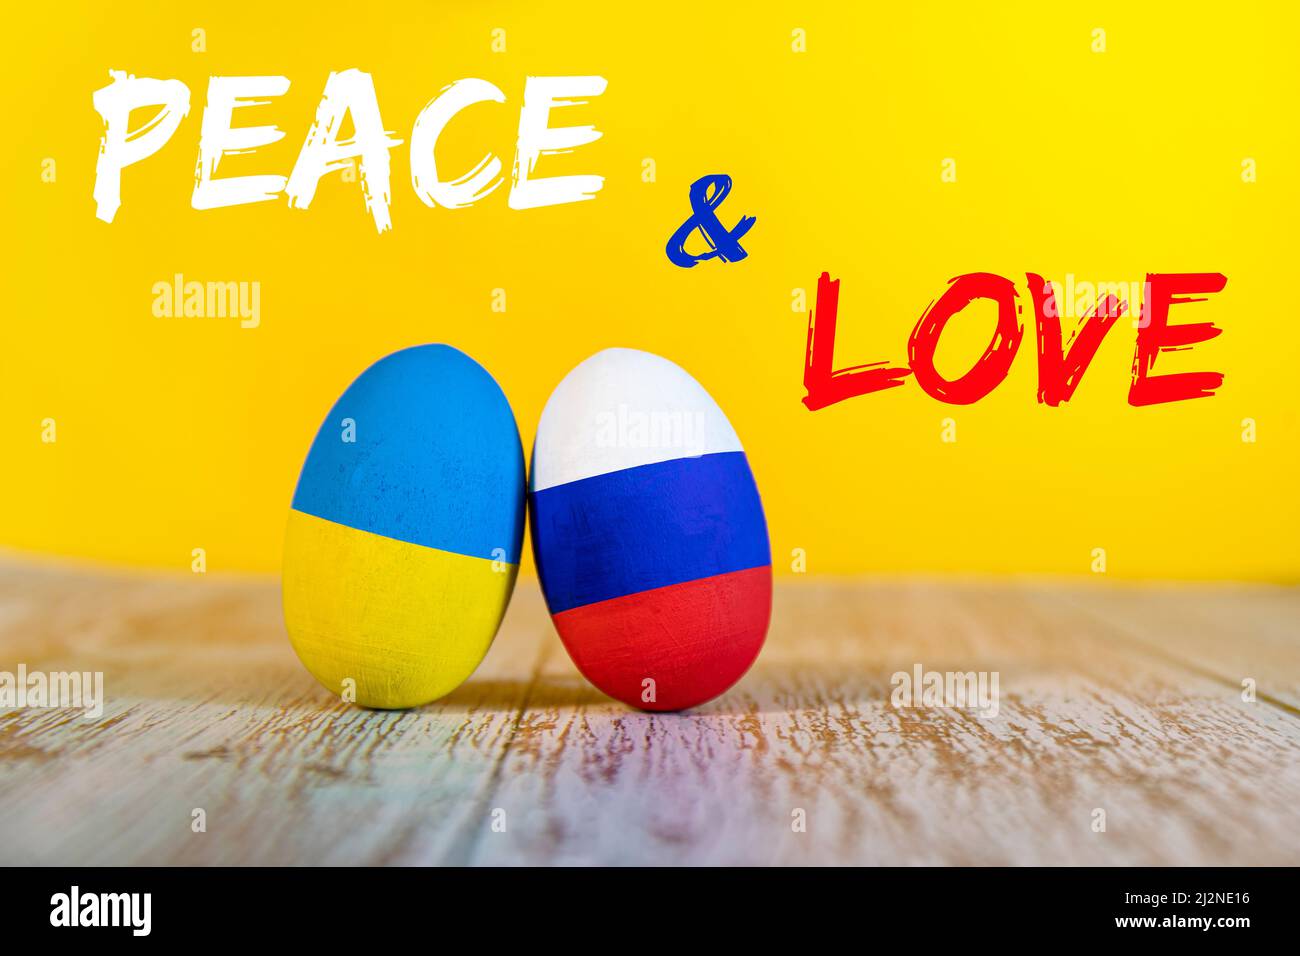 Hope for peace and love between Russia and Ukraine. Happy Easter with eggs decorated in the colors of the flags of Ukraine and Russia. Peace and love. Stock Photo